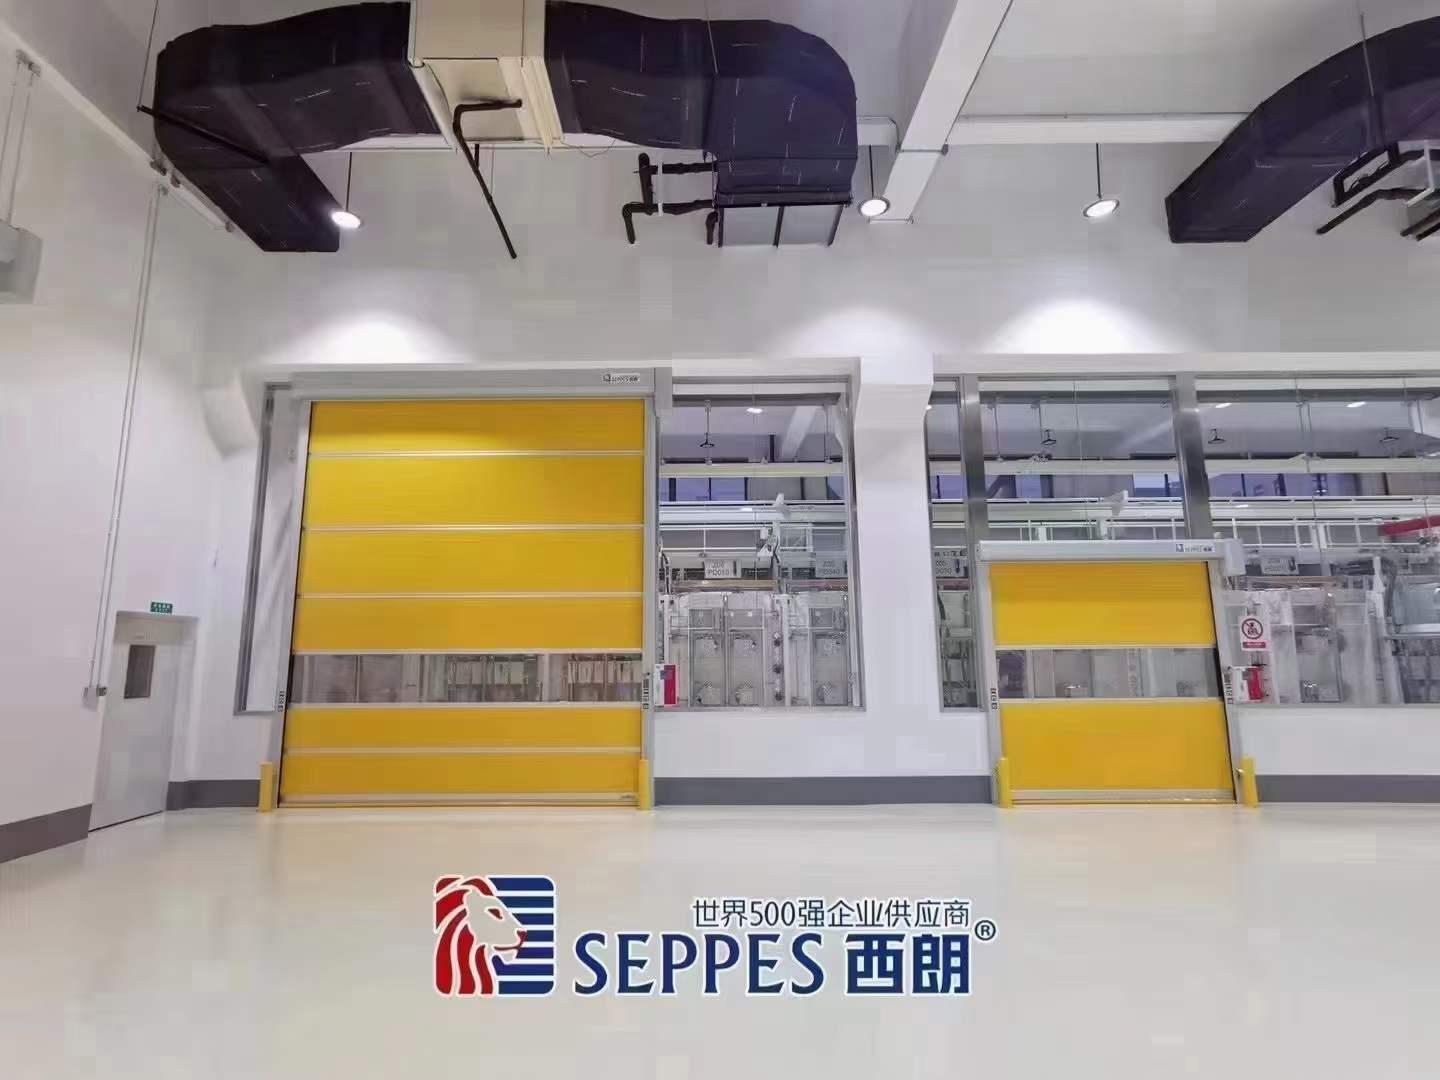 Why do food and pharmaceutical factories choose to install high speed door